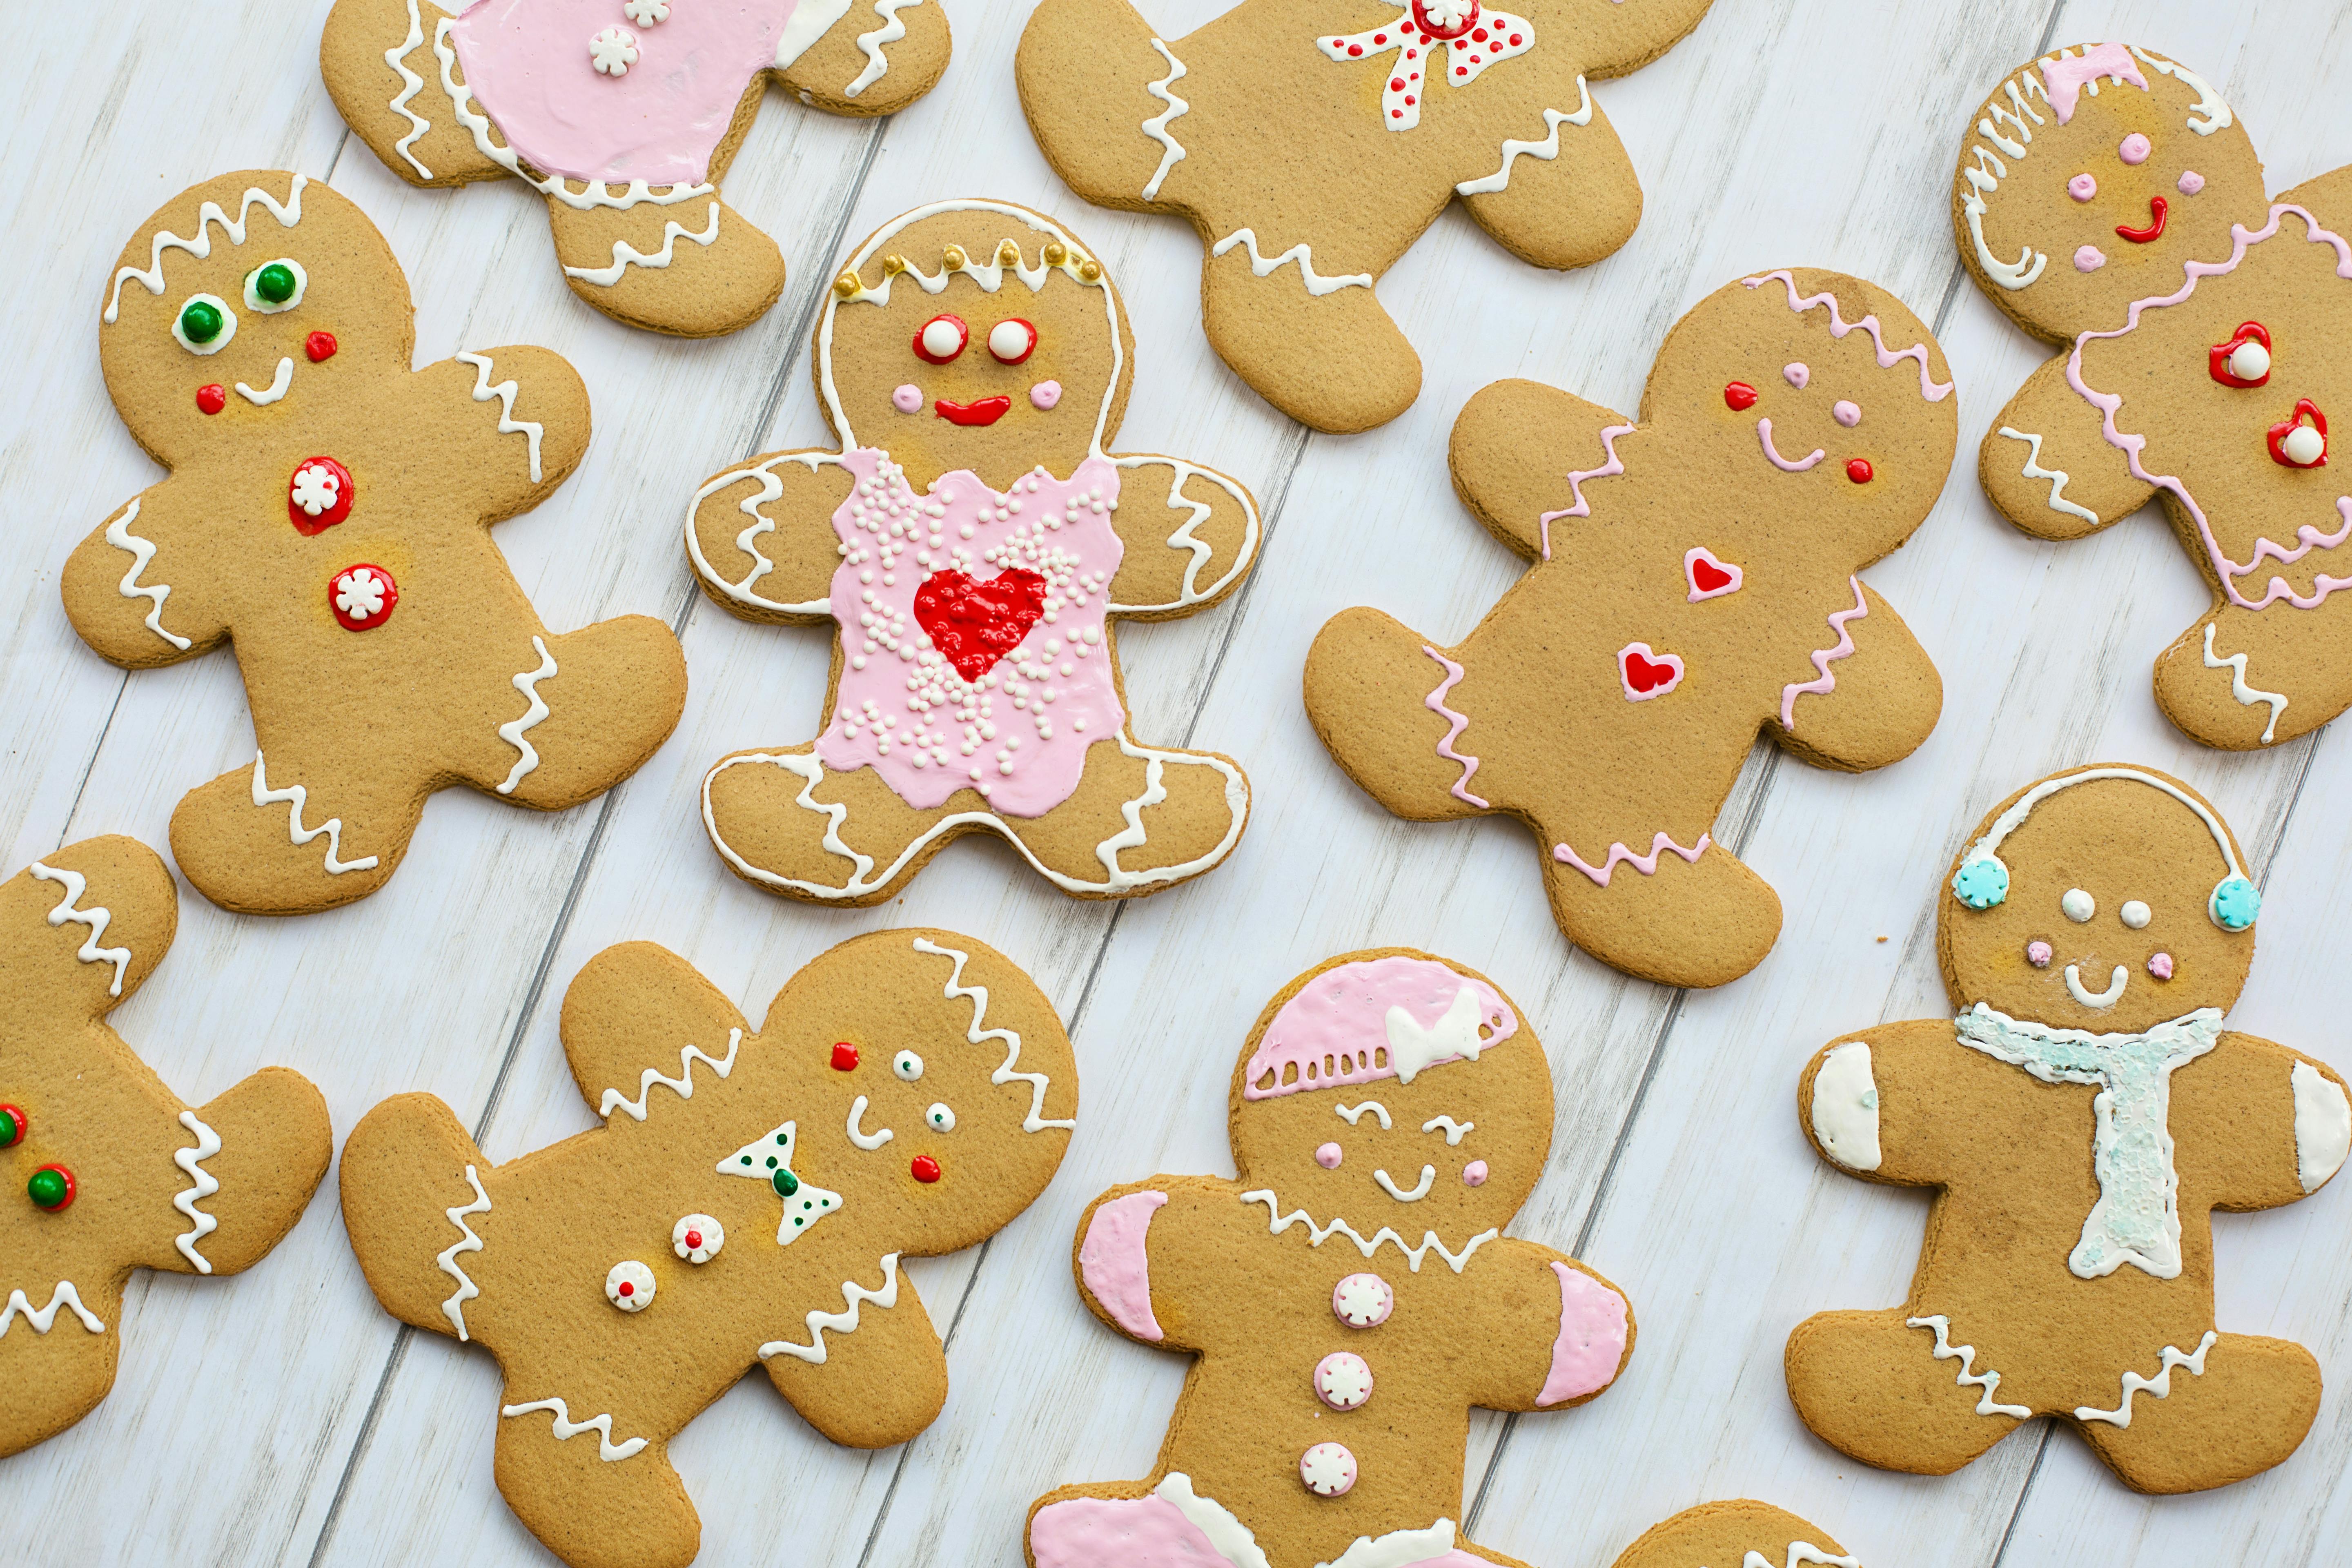 Many Gingerbread Man Cookies Wallpaper View Stock Illustration 1247388229   Shutterstock